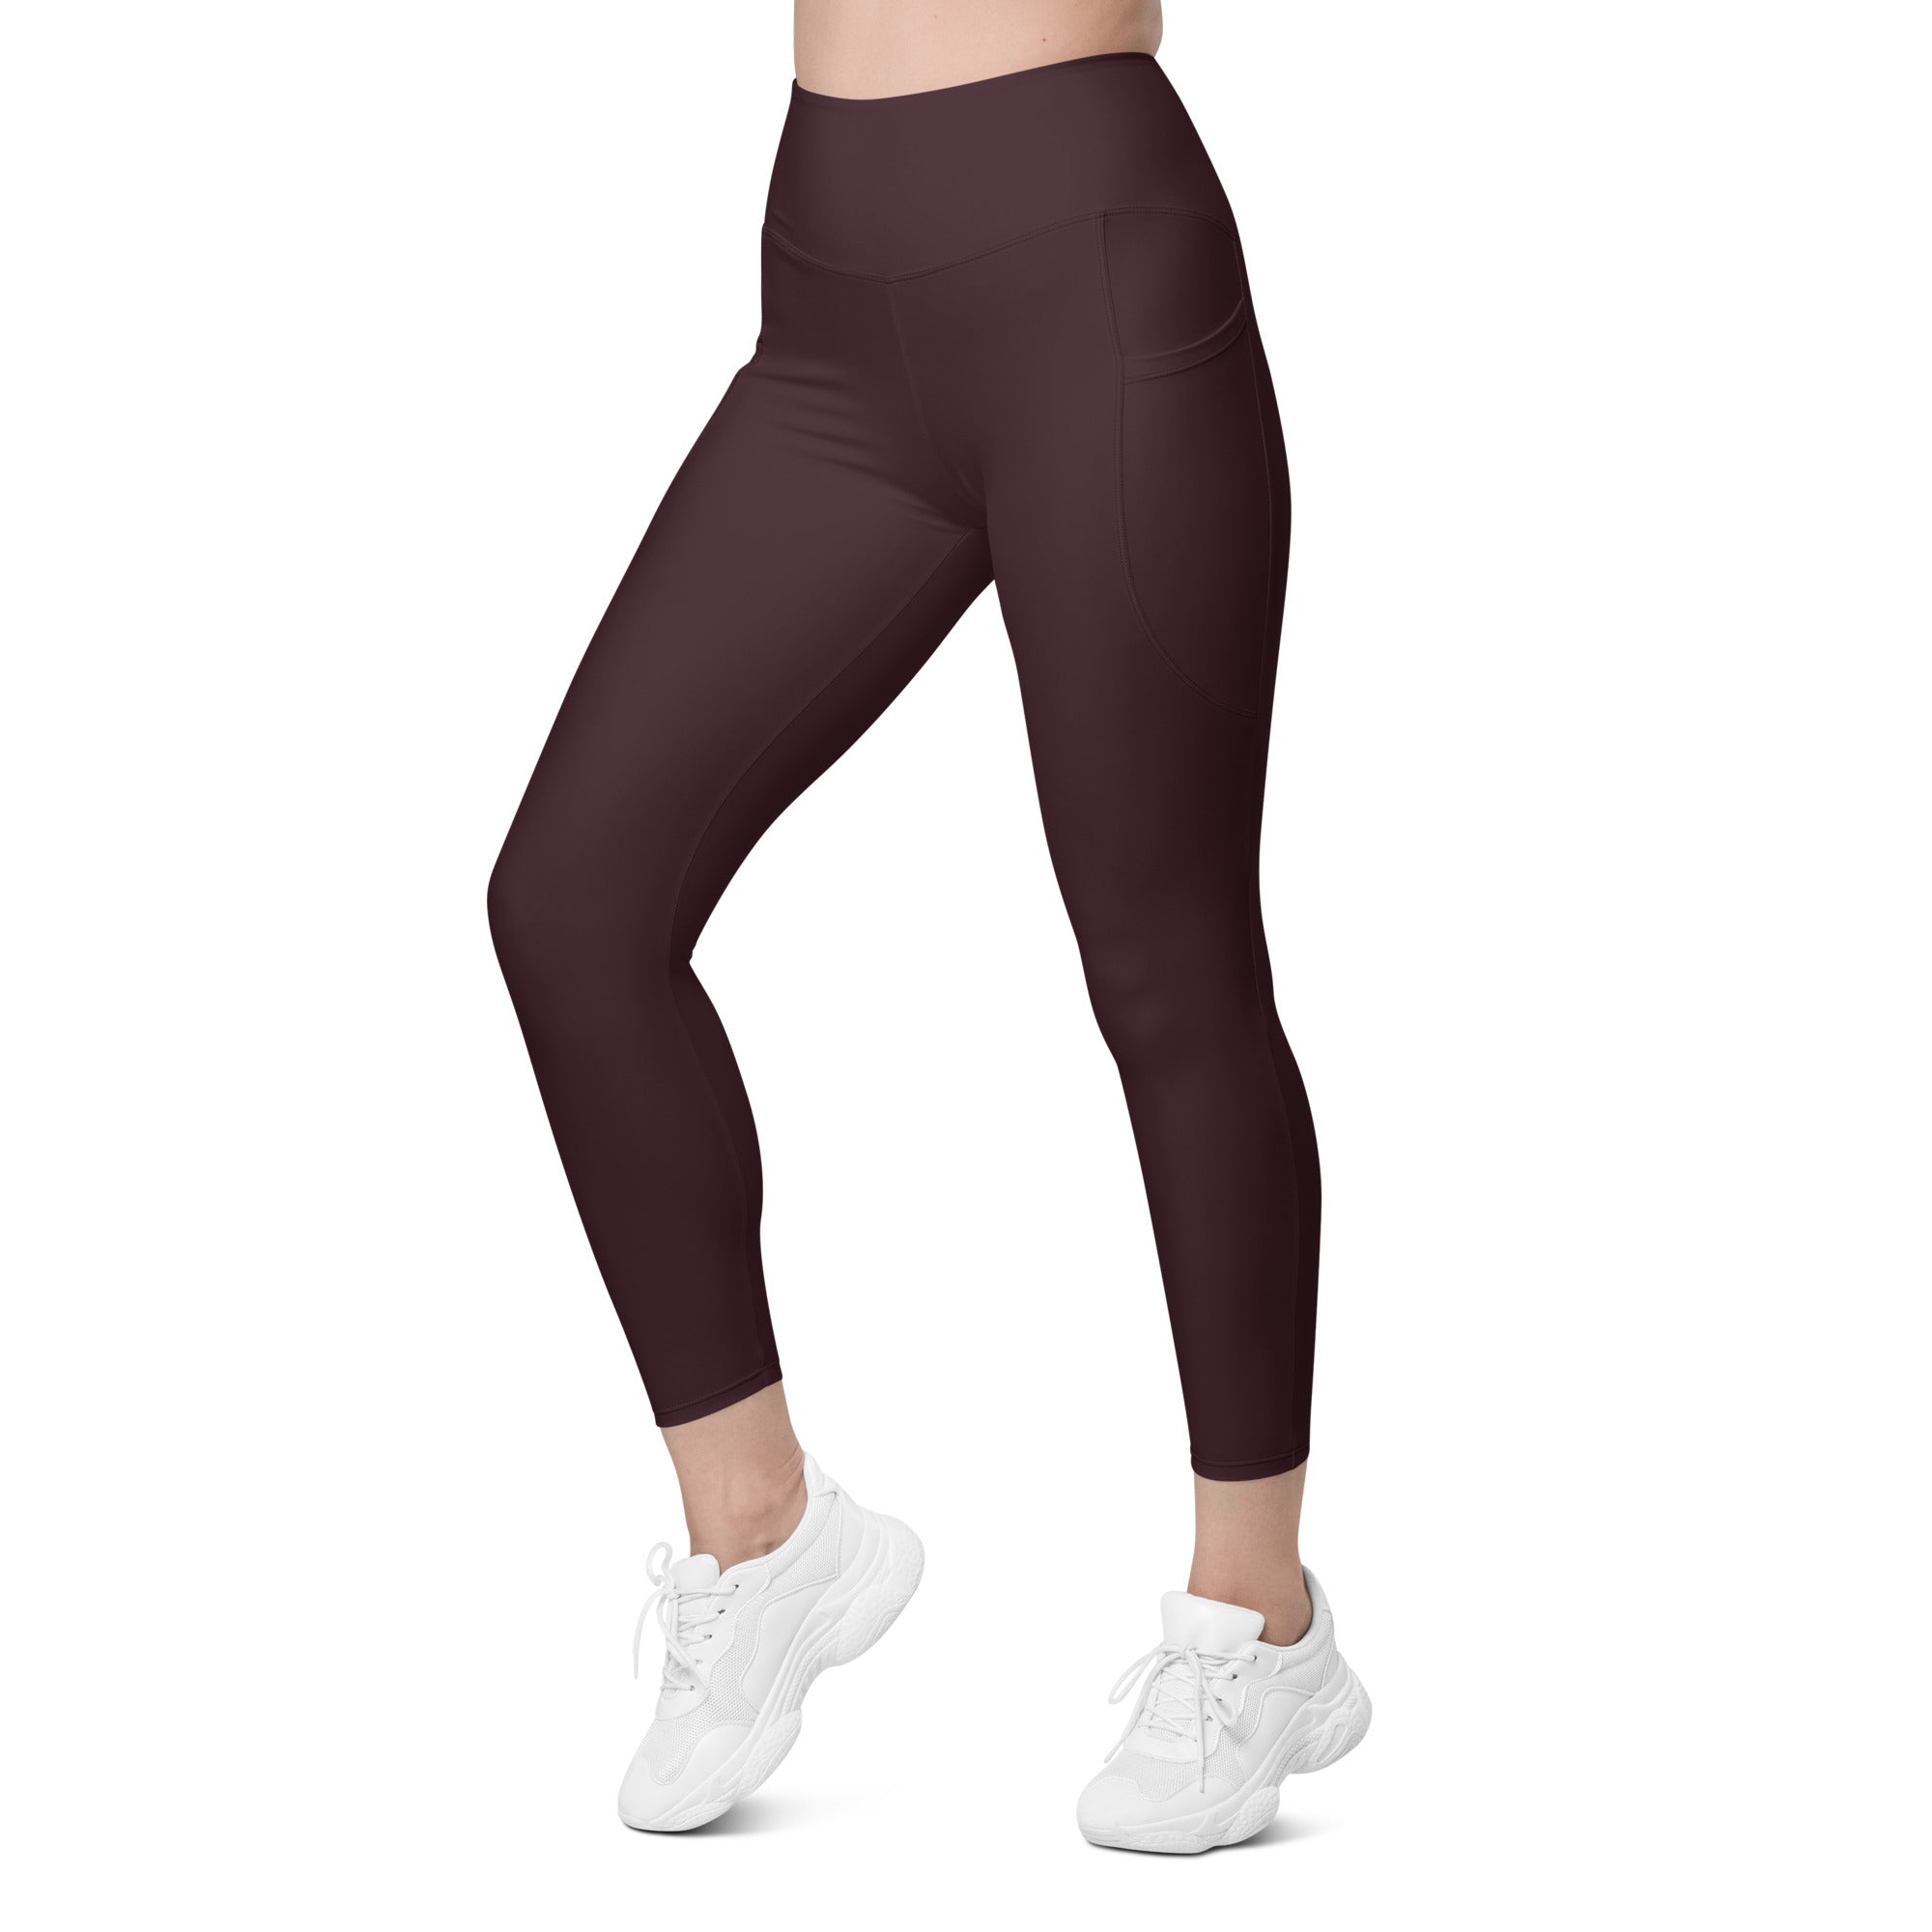 Women's fashionable sporty leggings with high waist and side pockets-girlstronginc.com